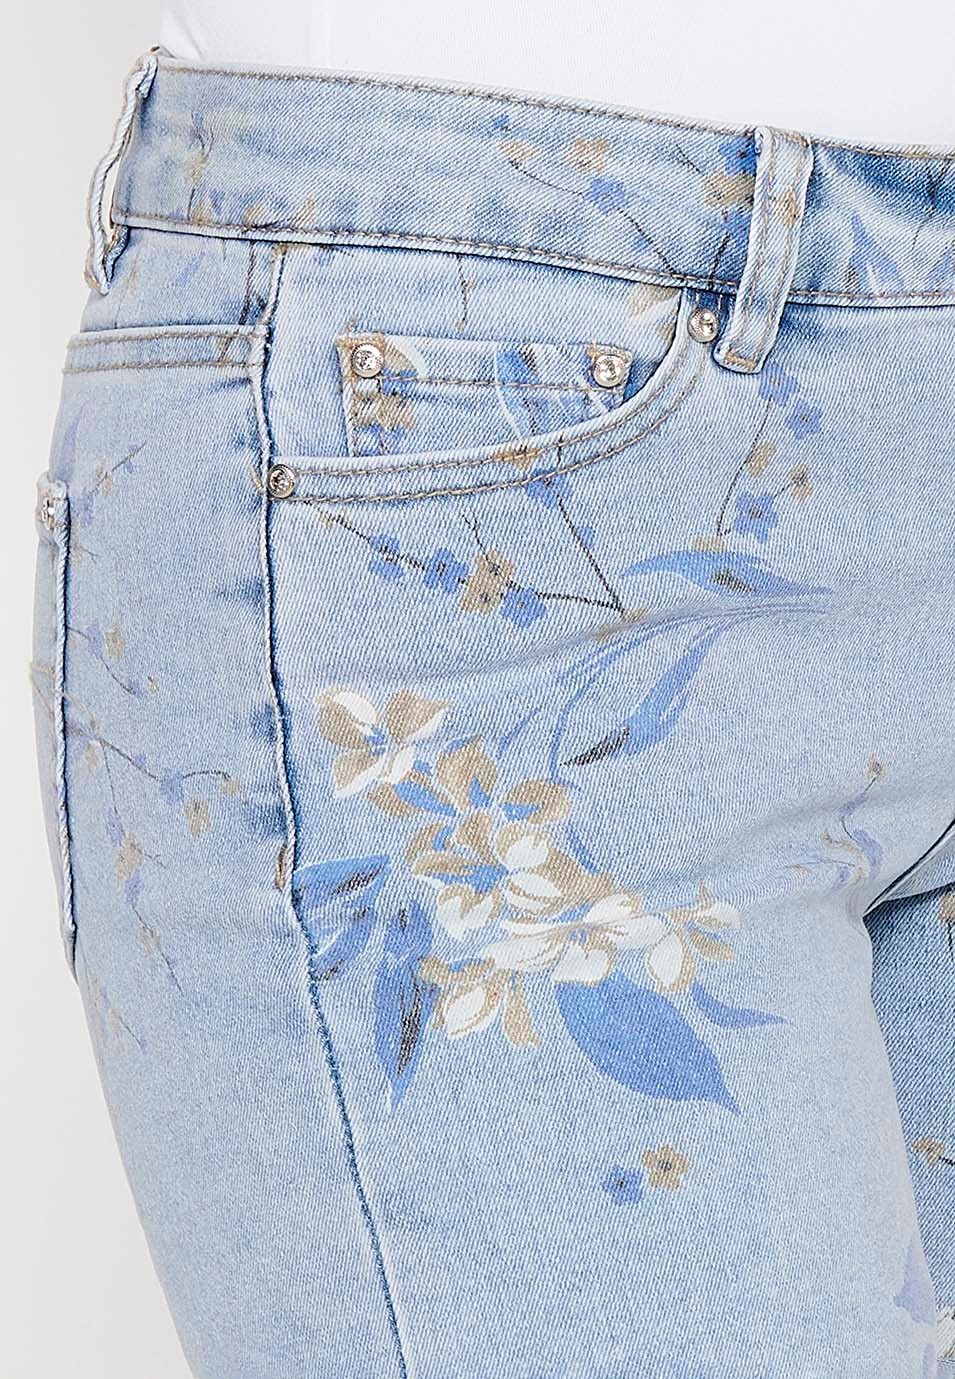 Shorts with a turn-up finish with zipper and button closure with a Blue floral print for Women 8